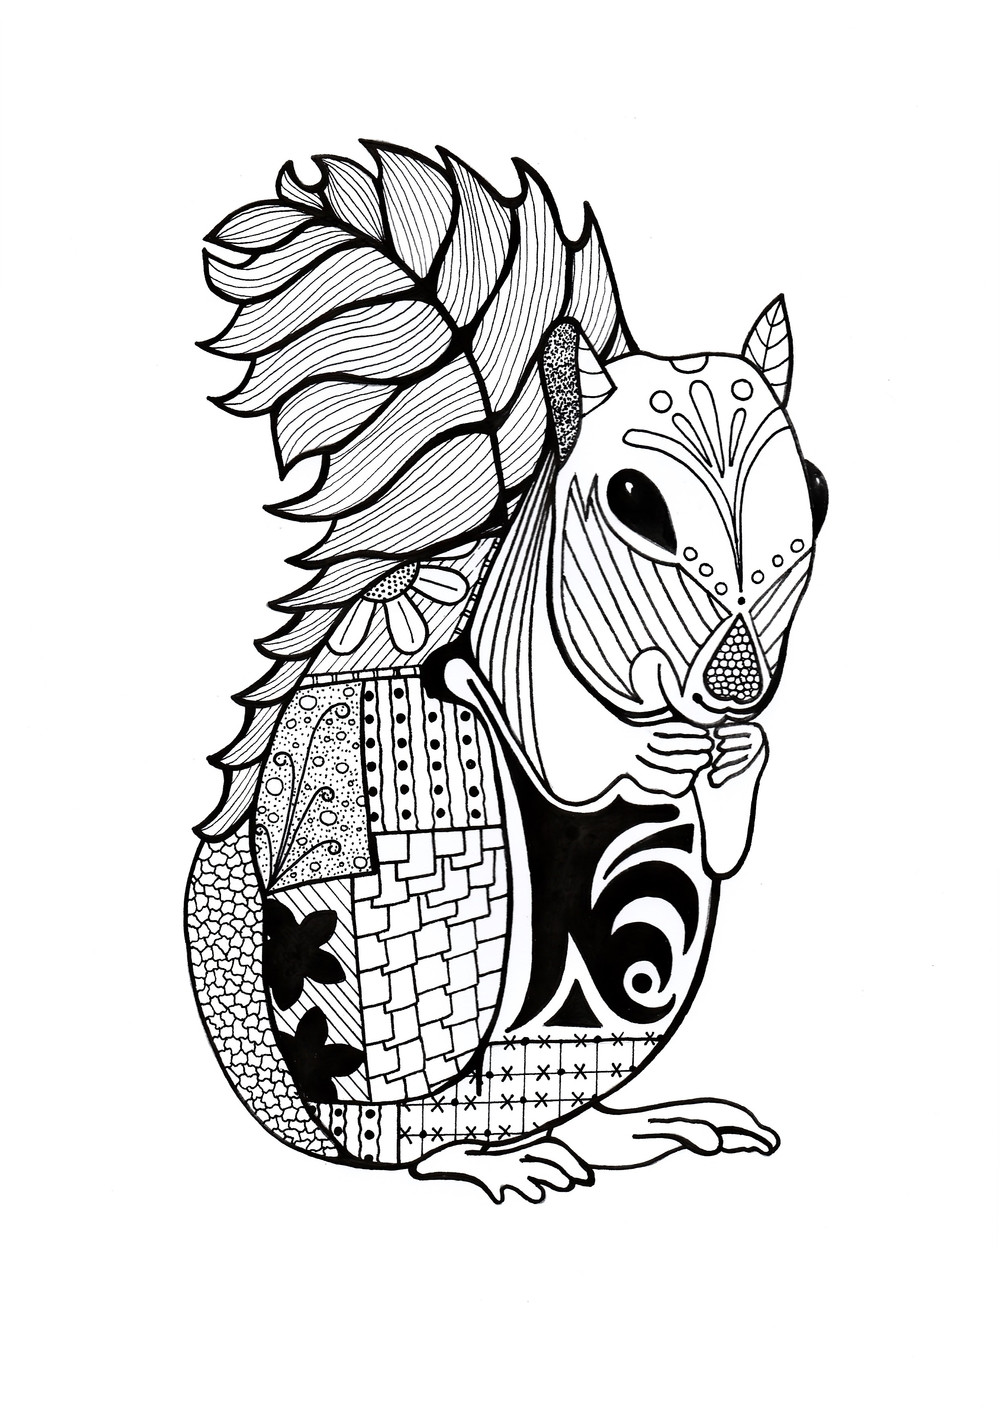 Adult Coloring Book Pictures
 Intricate Squirrel Adult Coloring Page